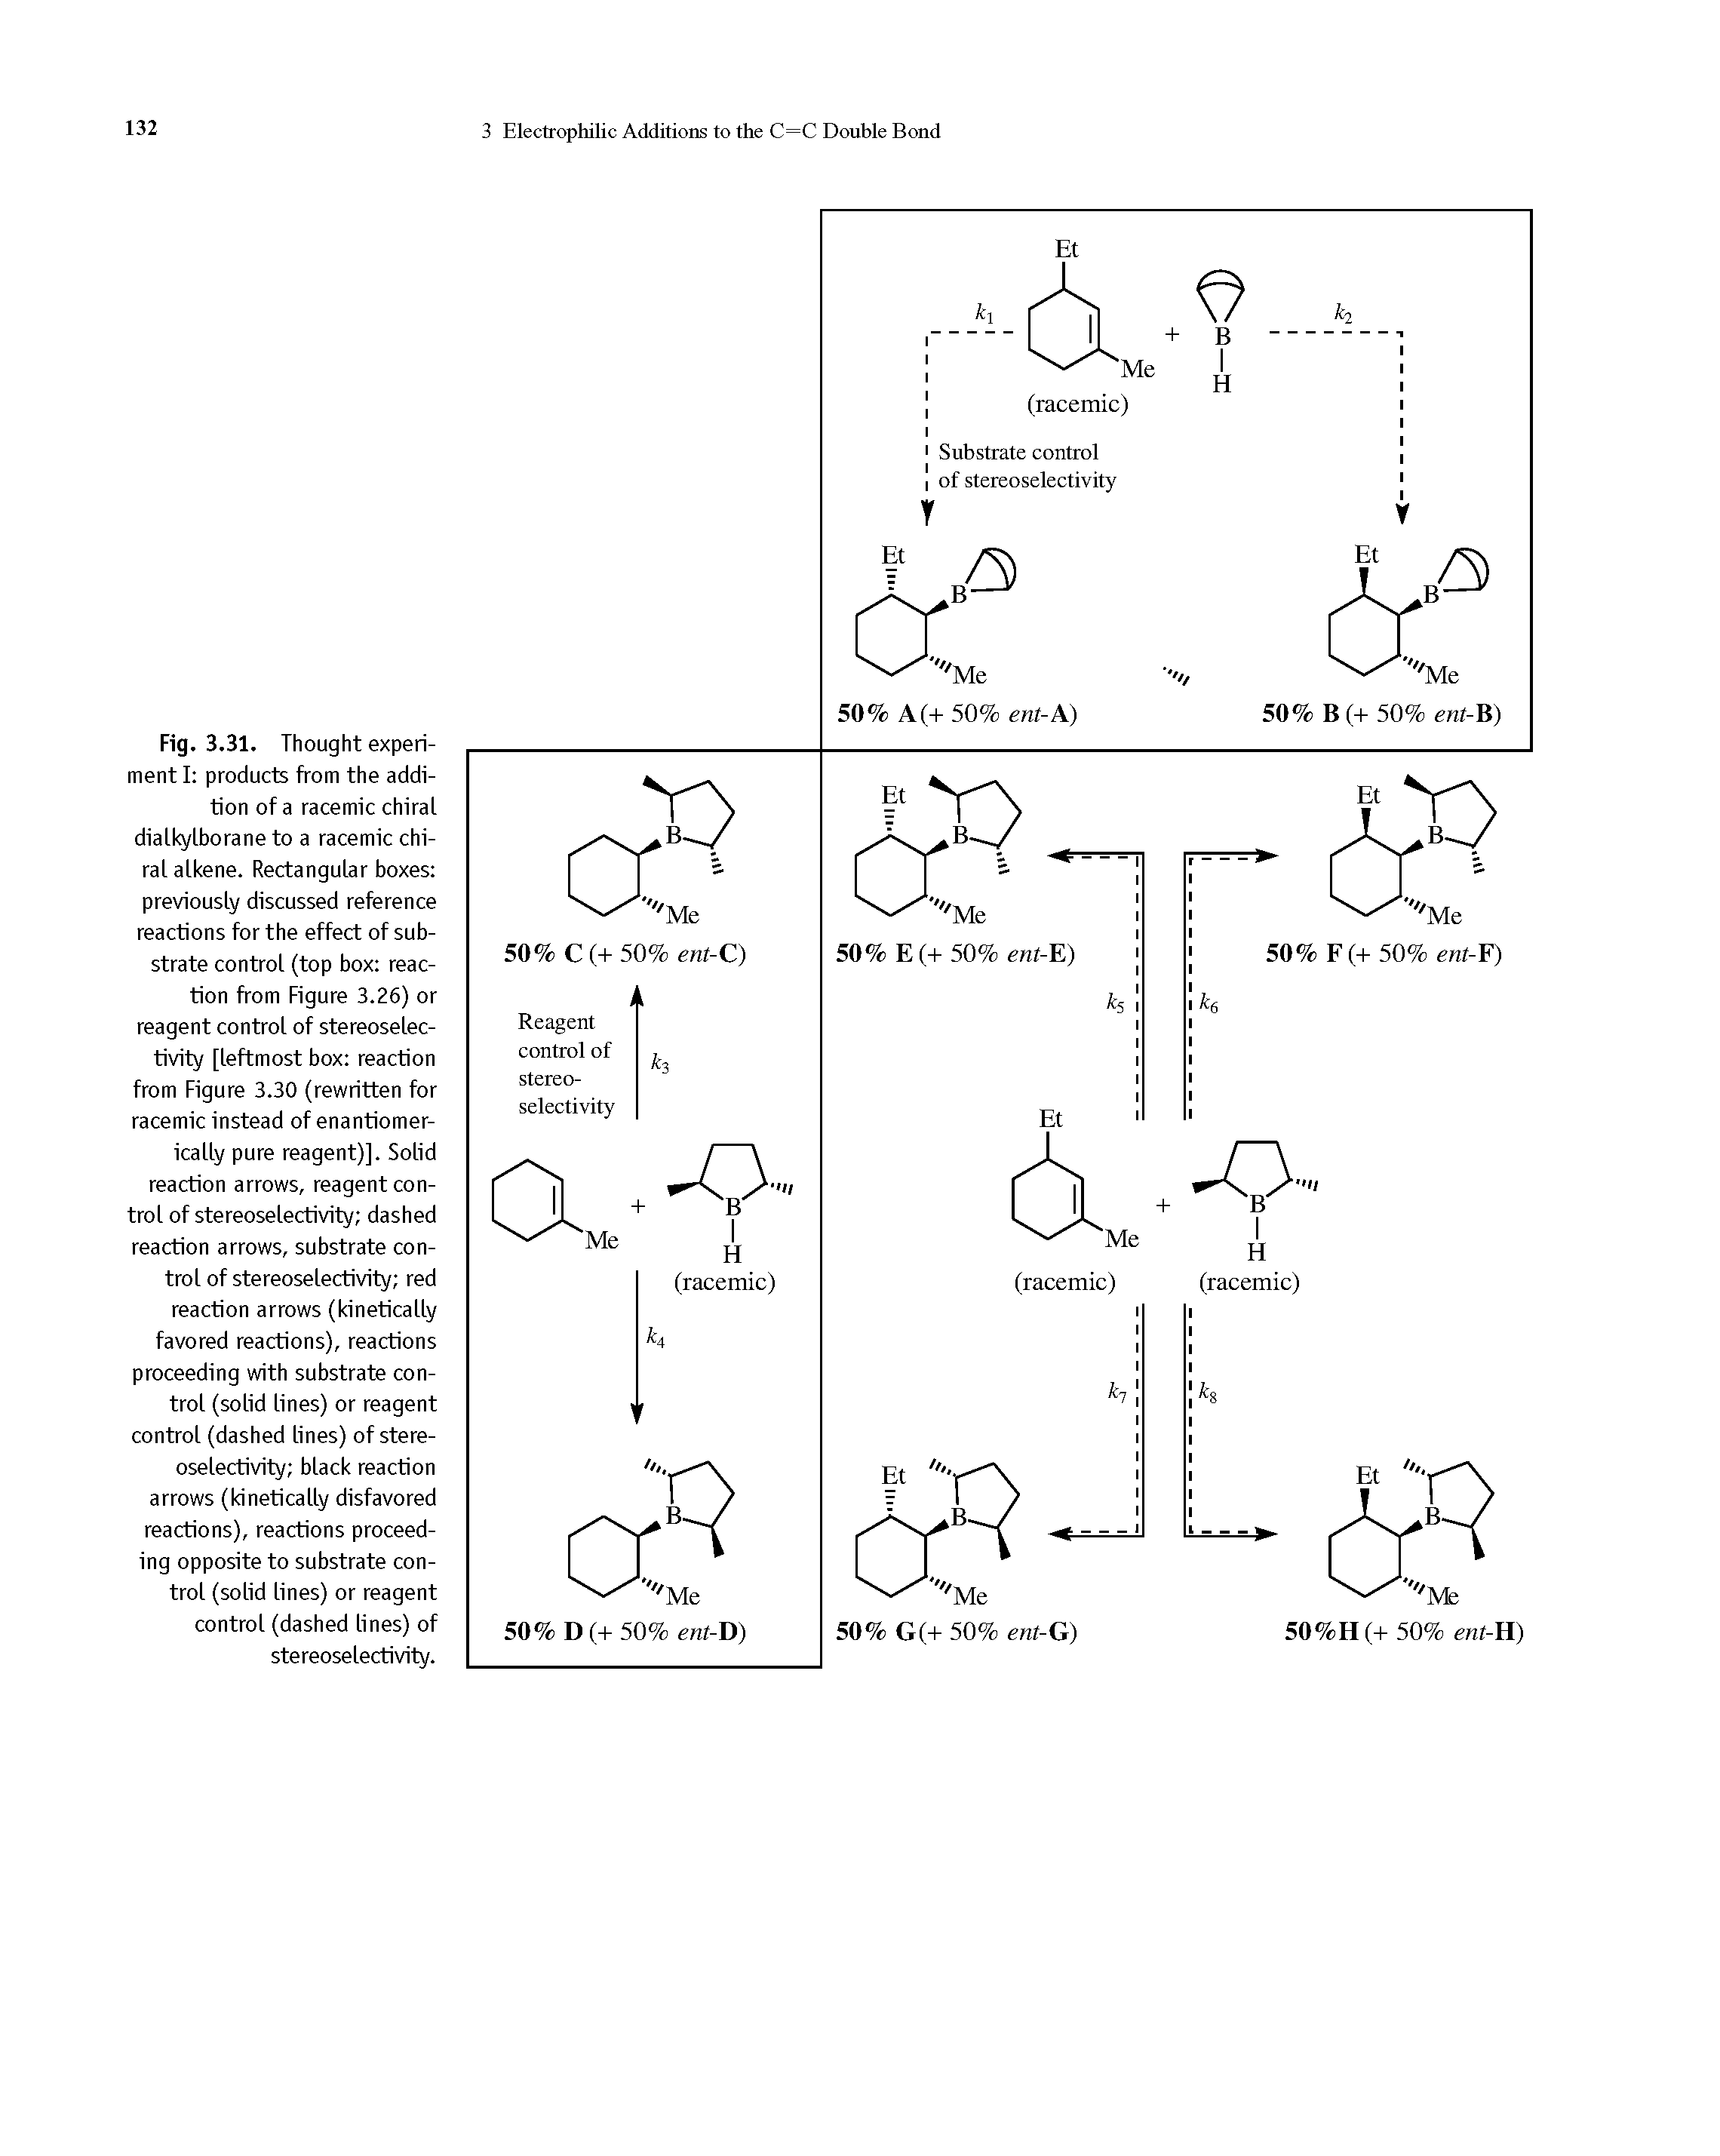 Fig. 3.31. Thought experiment I products from the addition of a racemic chiral dialkylborane to a racemic chiral alkene. Rectangular boxes previously discussed reference reactions for the effect of substrate control (top box reaction from Figure 3.26) or reagent control of stereoselectivity [leftmost box reaction from Figure 3.30 (rewritten for racemic instead of enantiomer-ically pure reagent)]. Solid reaction arrows, reagent control of stereoselectivity dashed reaction arrows, substrate control of stereoselectivity red reaction arrows (kinetically favored reactions), reactions proceeding with substrate control (solid lines) or reagent control (dashed lines) of stereoselectivity black reaction arrows (kinetically disfavored reactions), reactions proceeding opposite to substrate control (solid lines) or reagent control (dashed lines) of stereoselectivity.